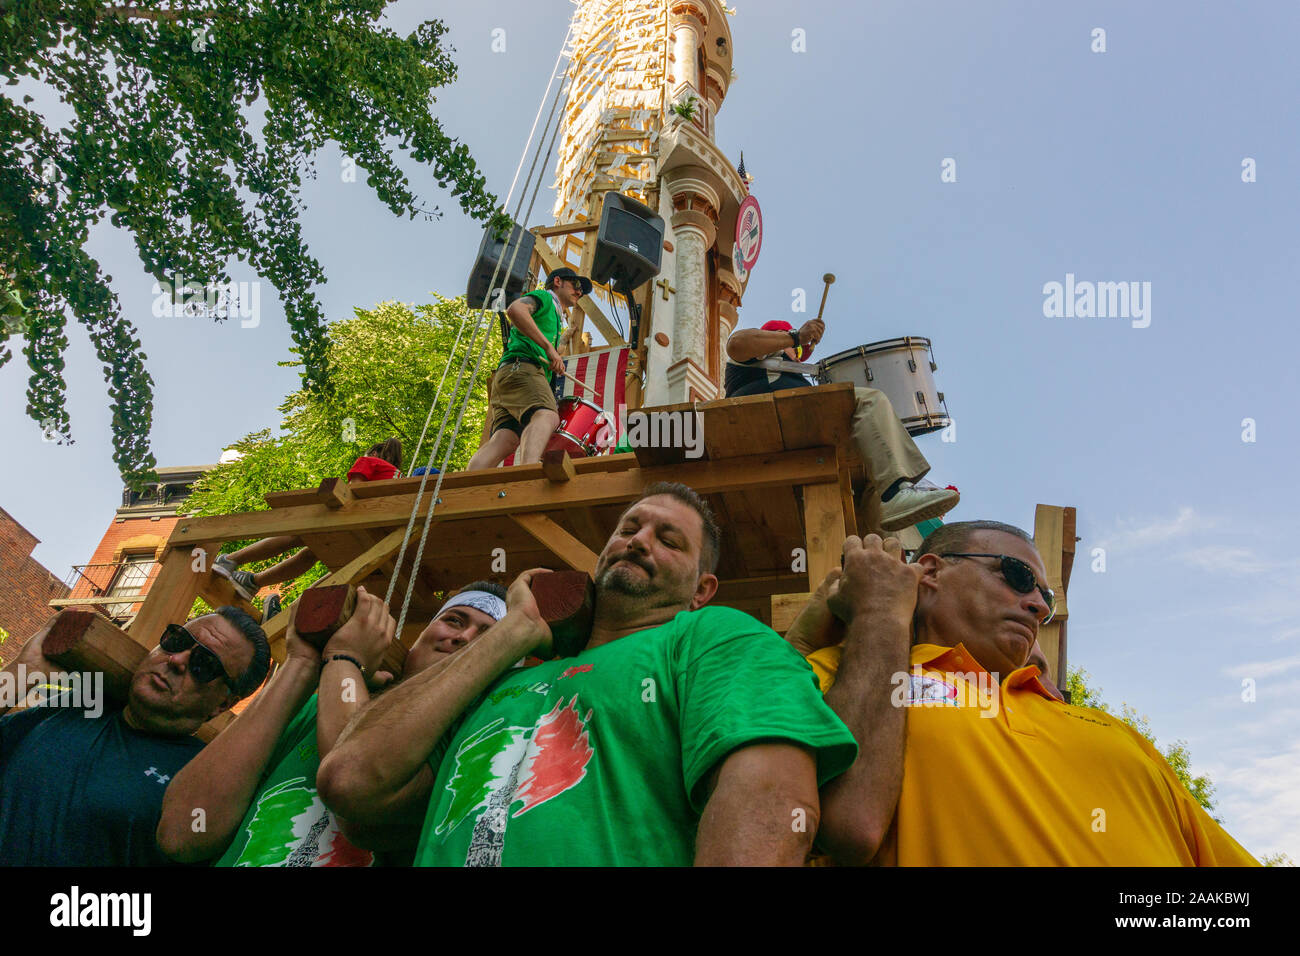 New York, USA - August 12, 2018: the Giglio Feast took place in East Harlem, Brooklyn, in front of Our Lady of Mount Carmel church Stock Photo